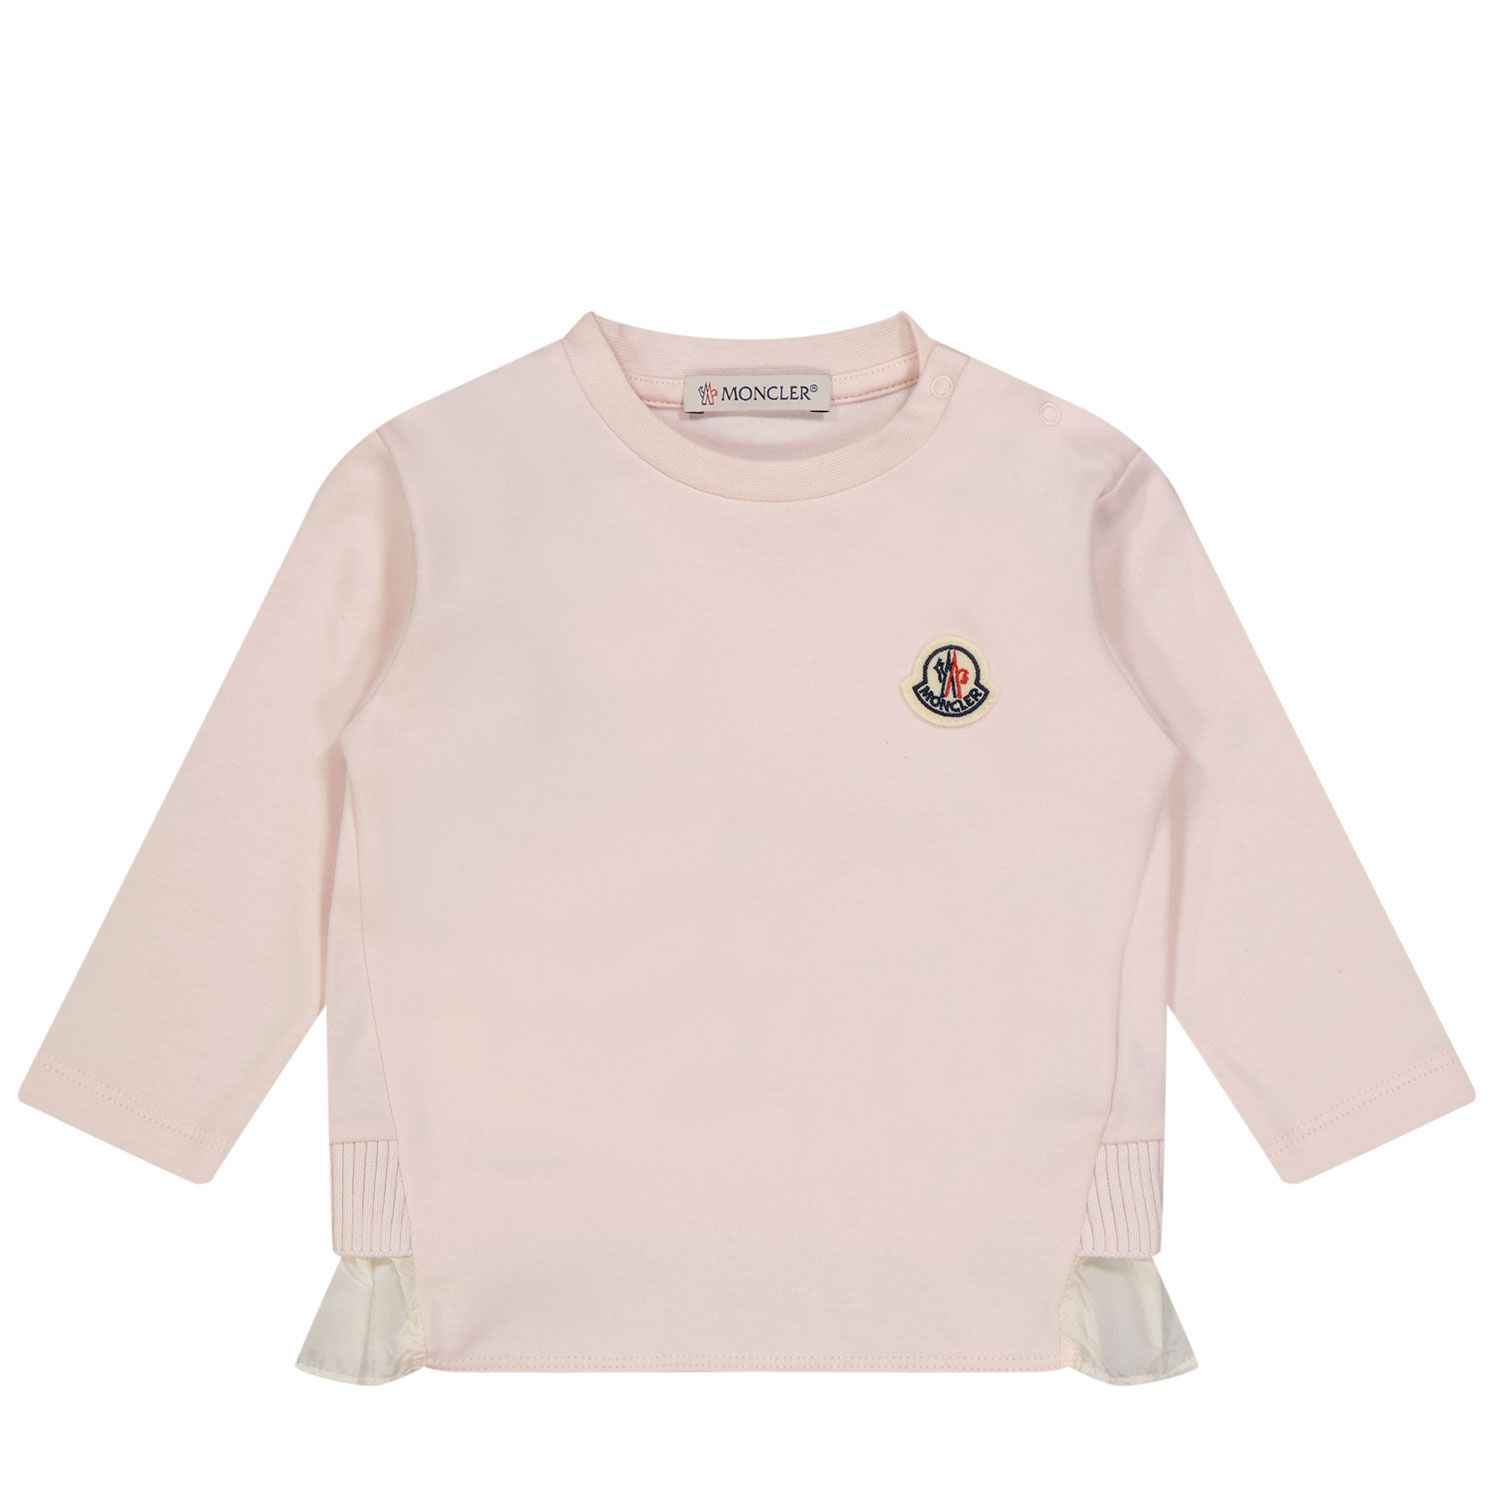 Picture of Moncler 9518D000088392E baby shirt light pink